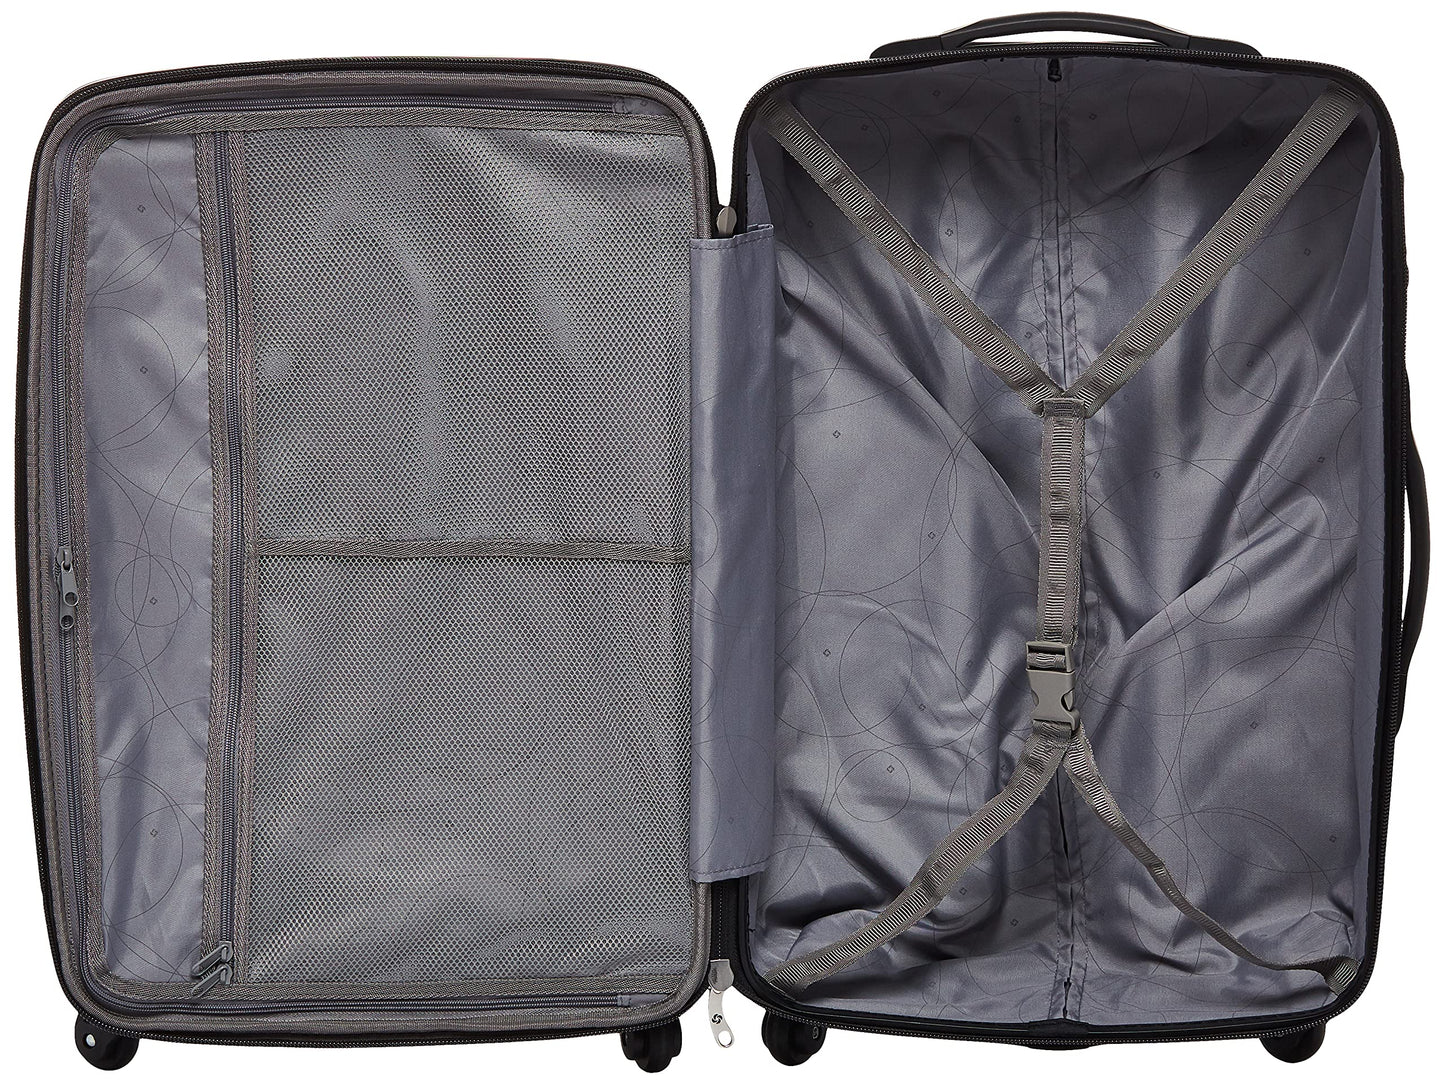 Samsonite Winfield 2 Hardside Luggage with Spinner Wheels, 3-Piece Set (20/24/28), Charcoal